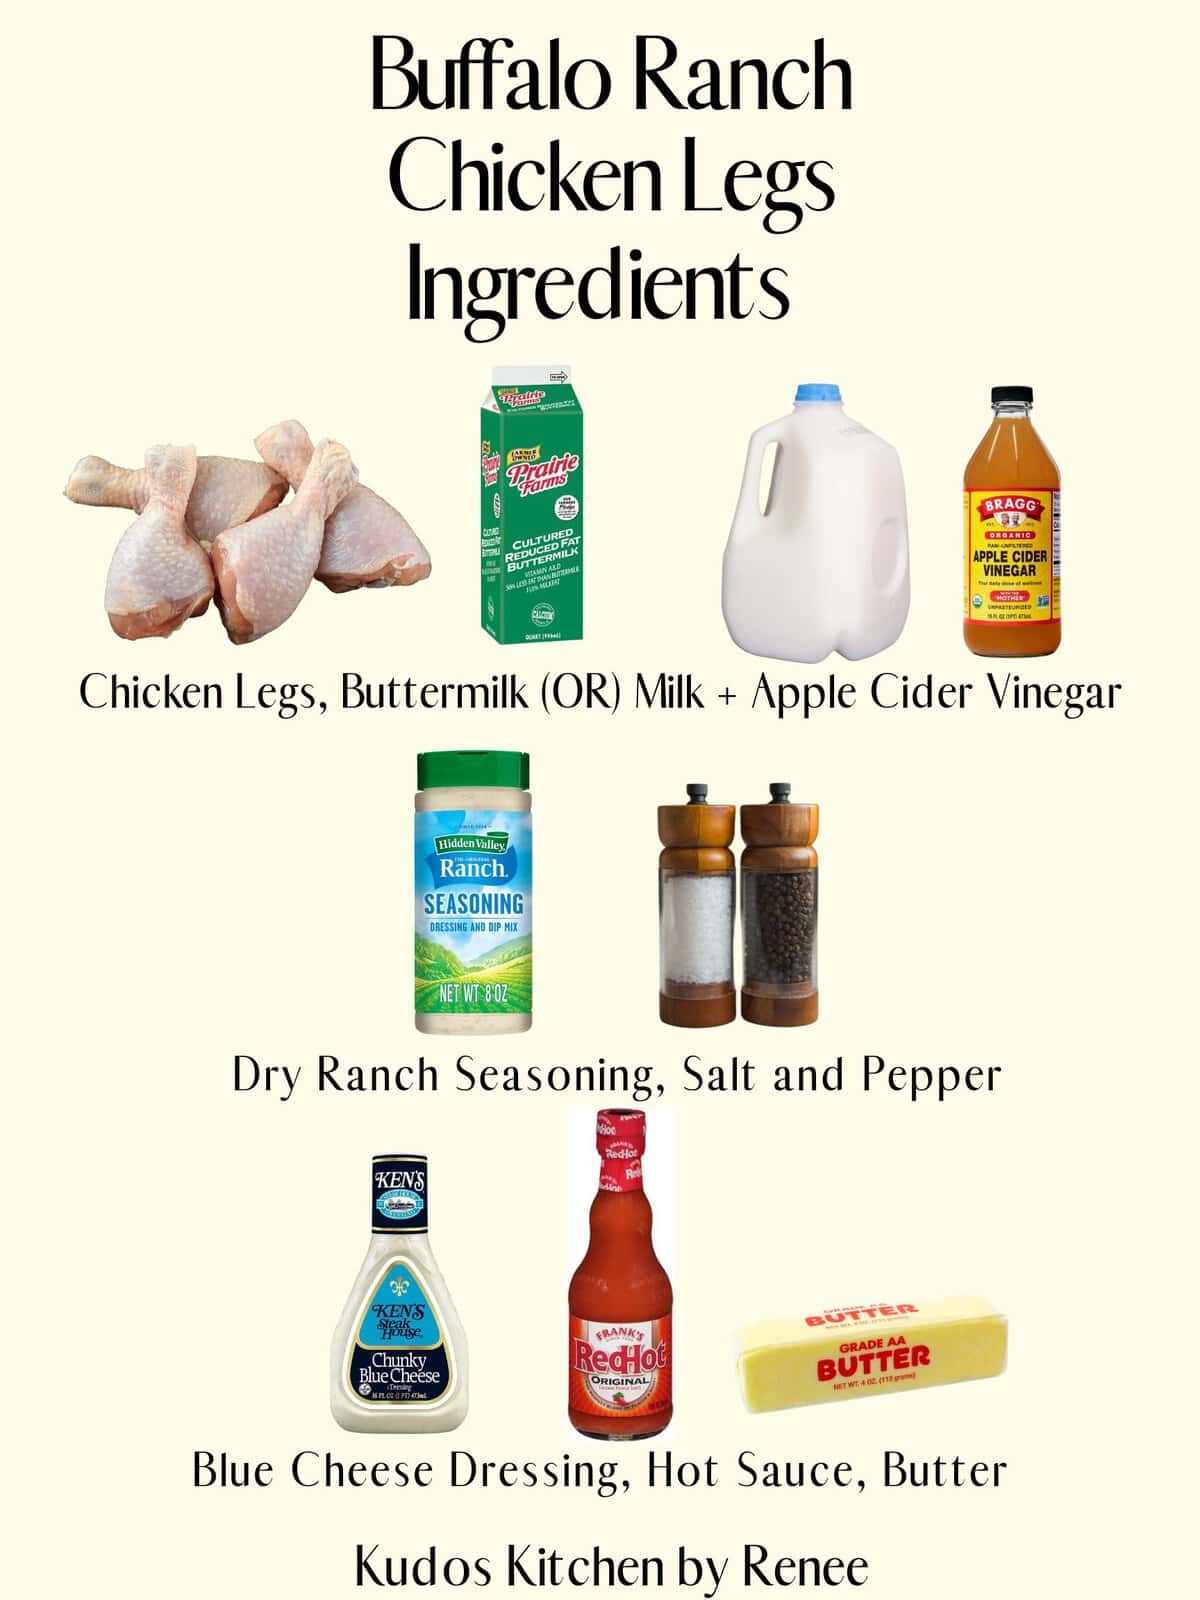 A visual ingredient list for making Buffalo Ranch Chicken Legs.